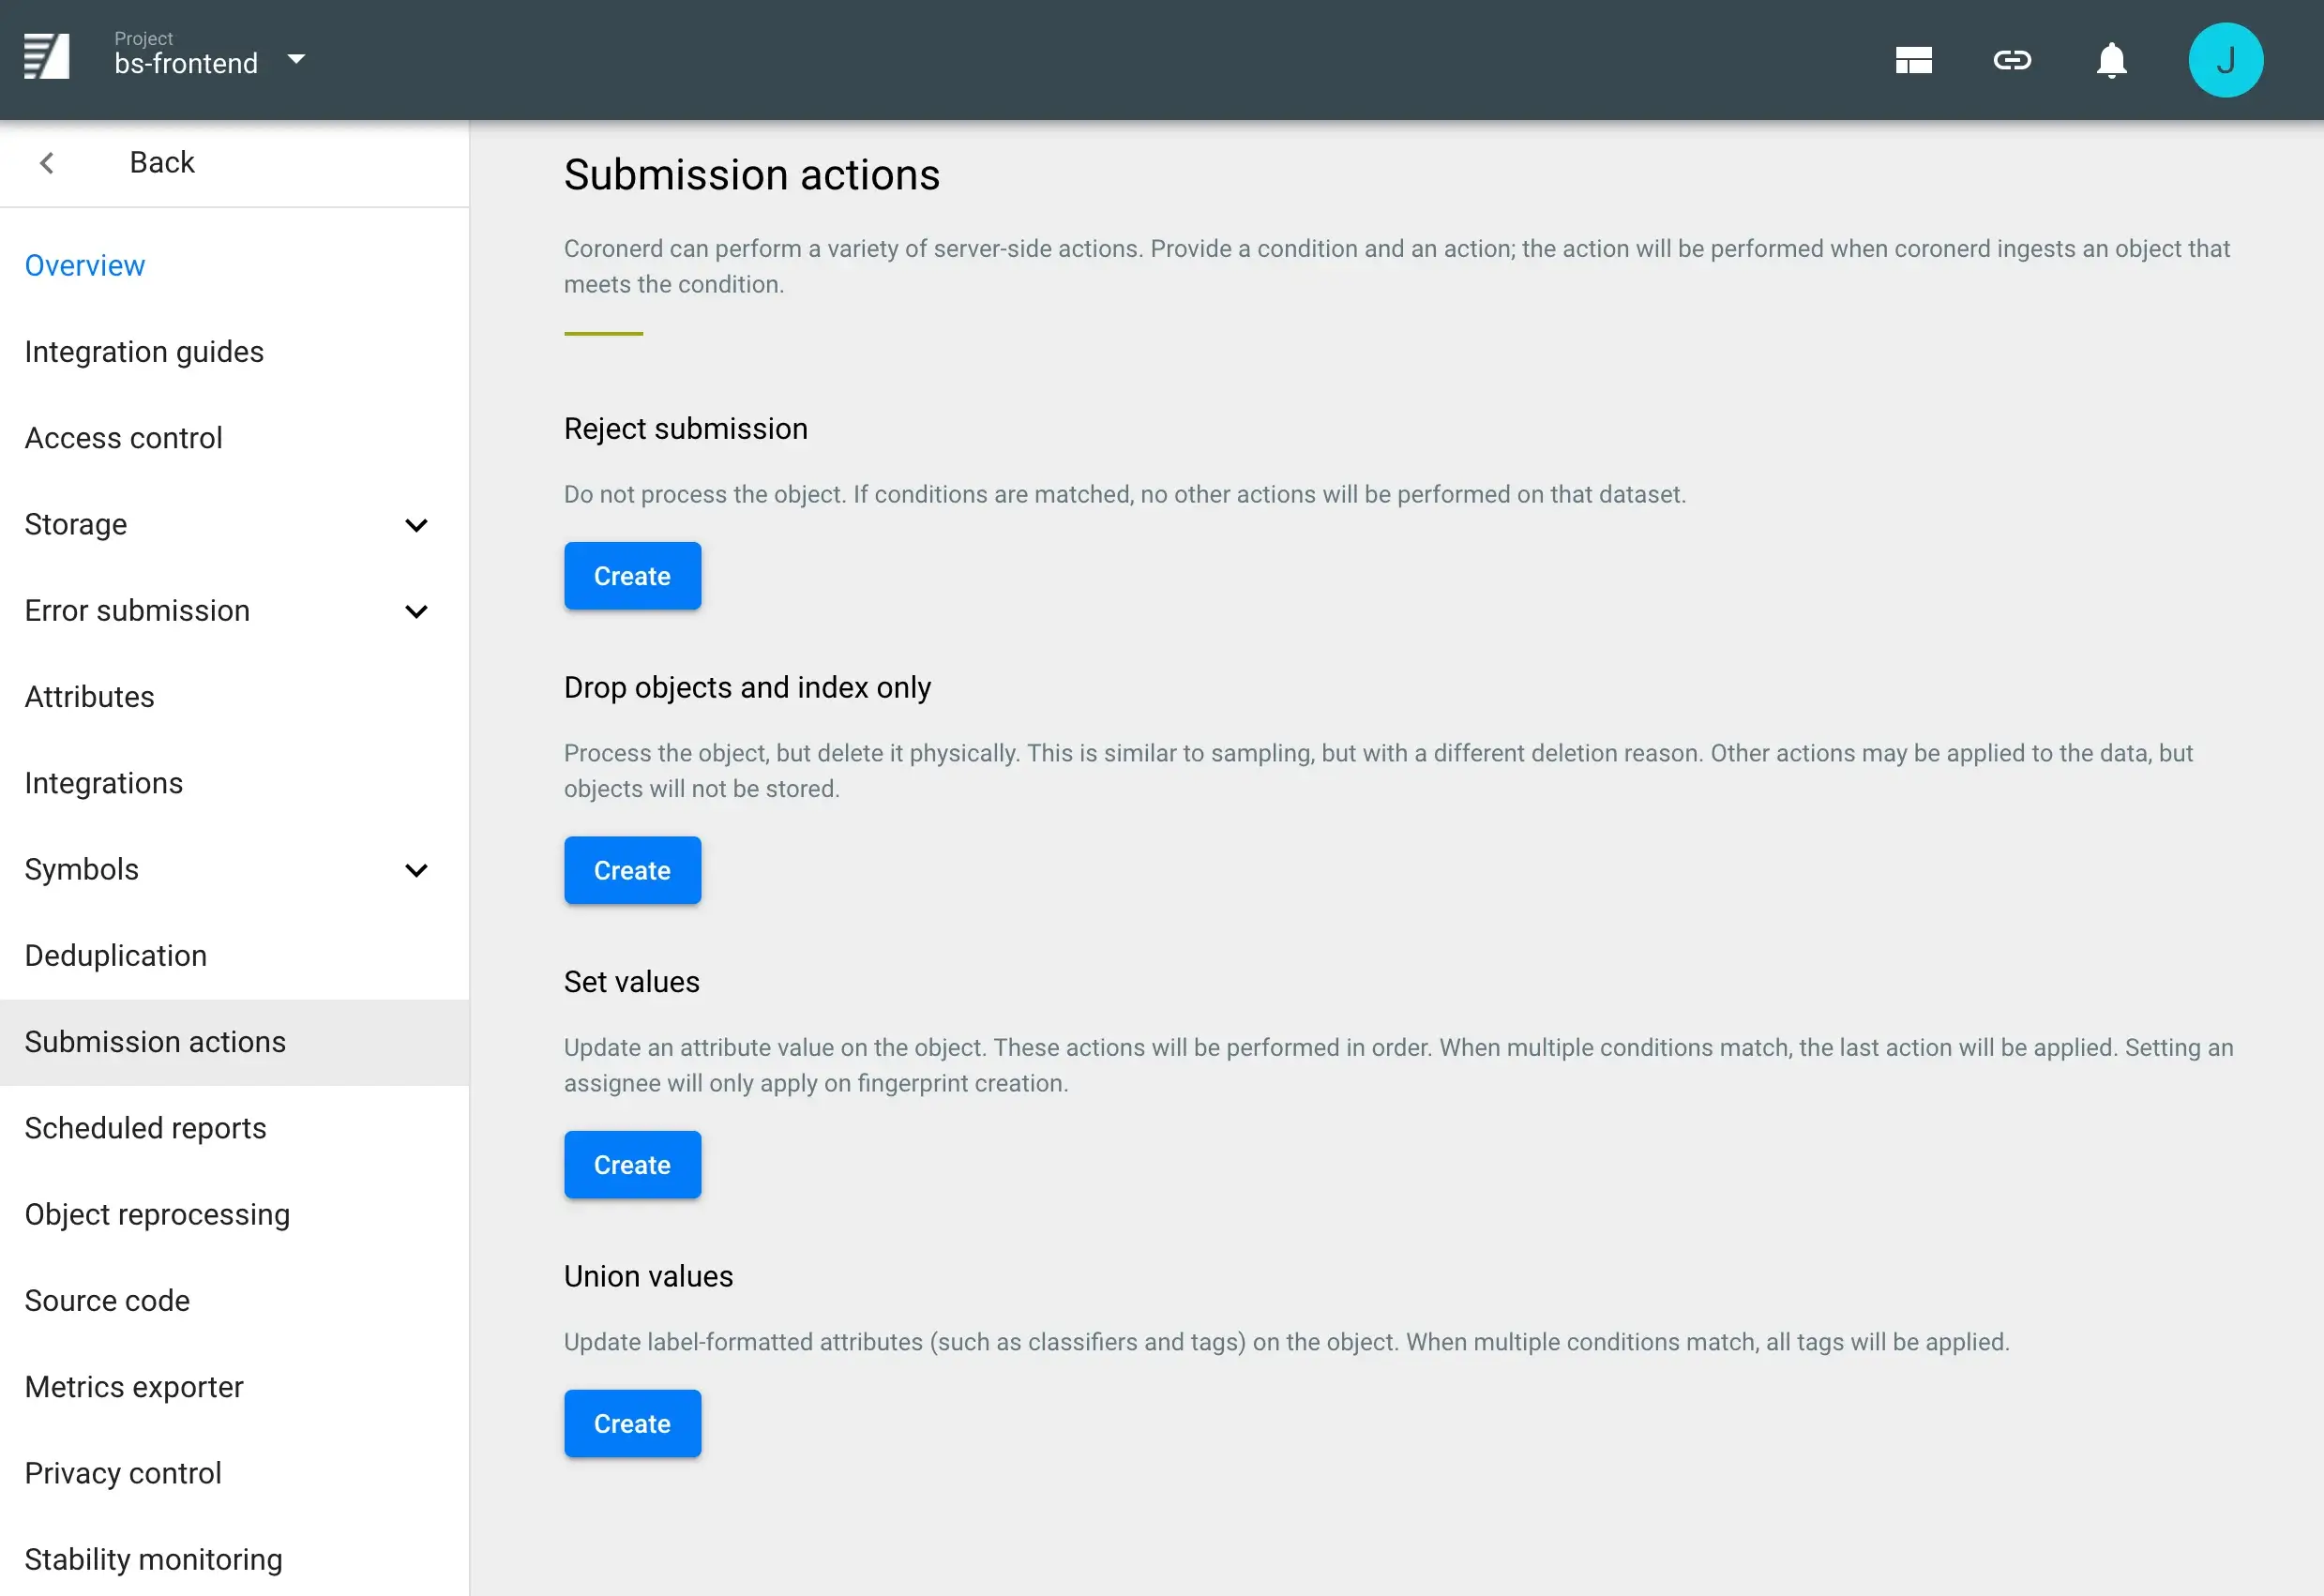 Shows the available submission actions in the Project Settings.